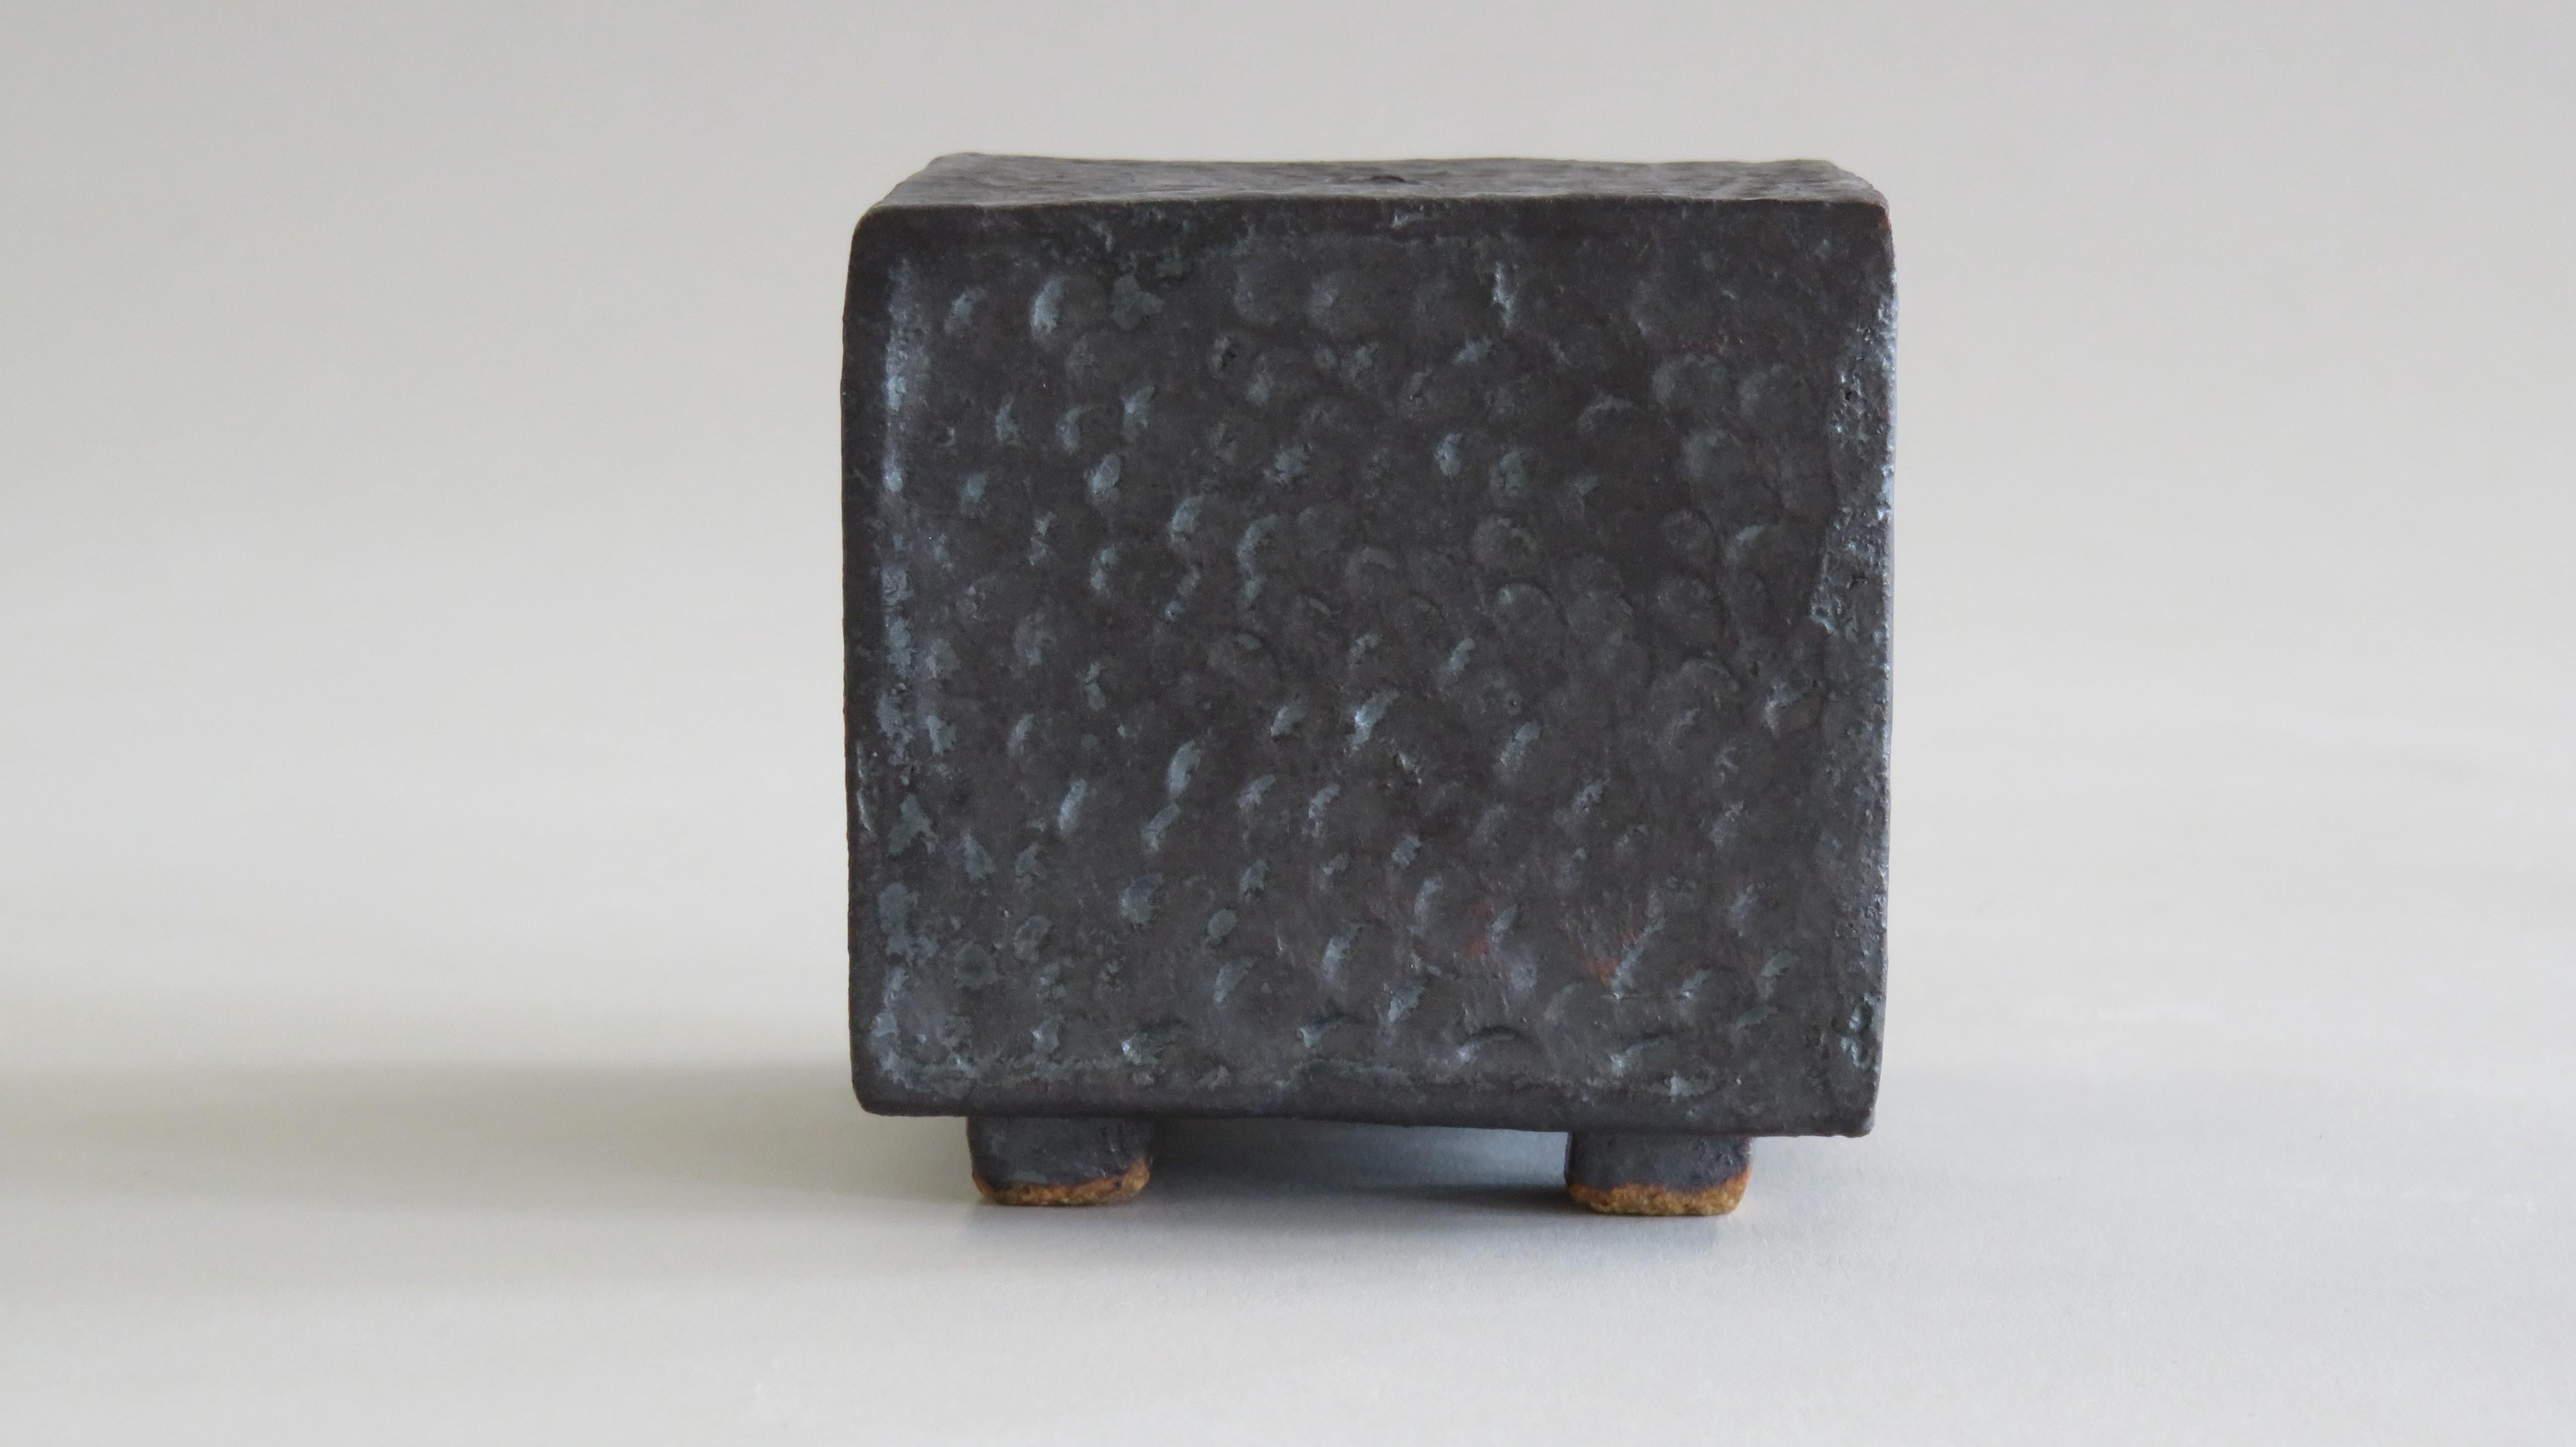 North American Small Ceramic Contemplation Cube, Mottled Surface in Metallic Black-Brown Glaze